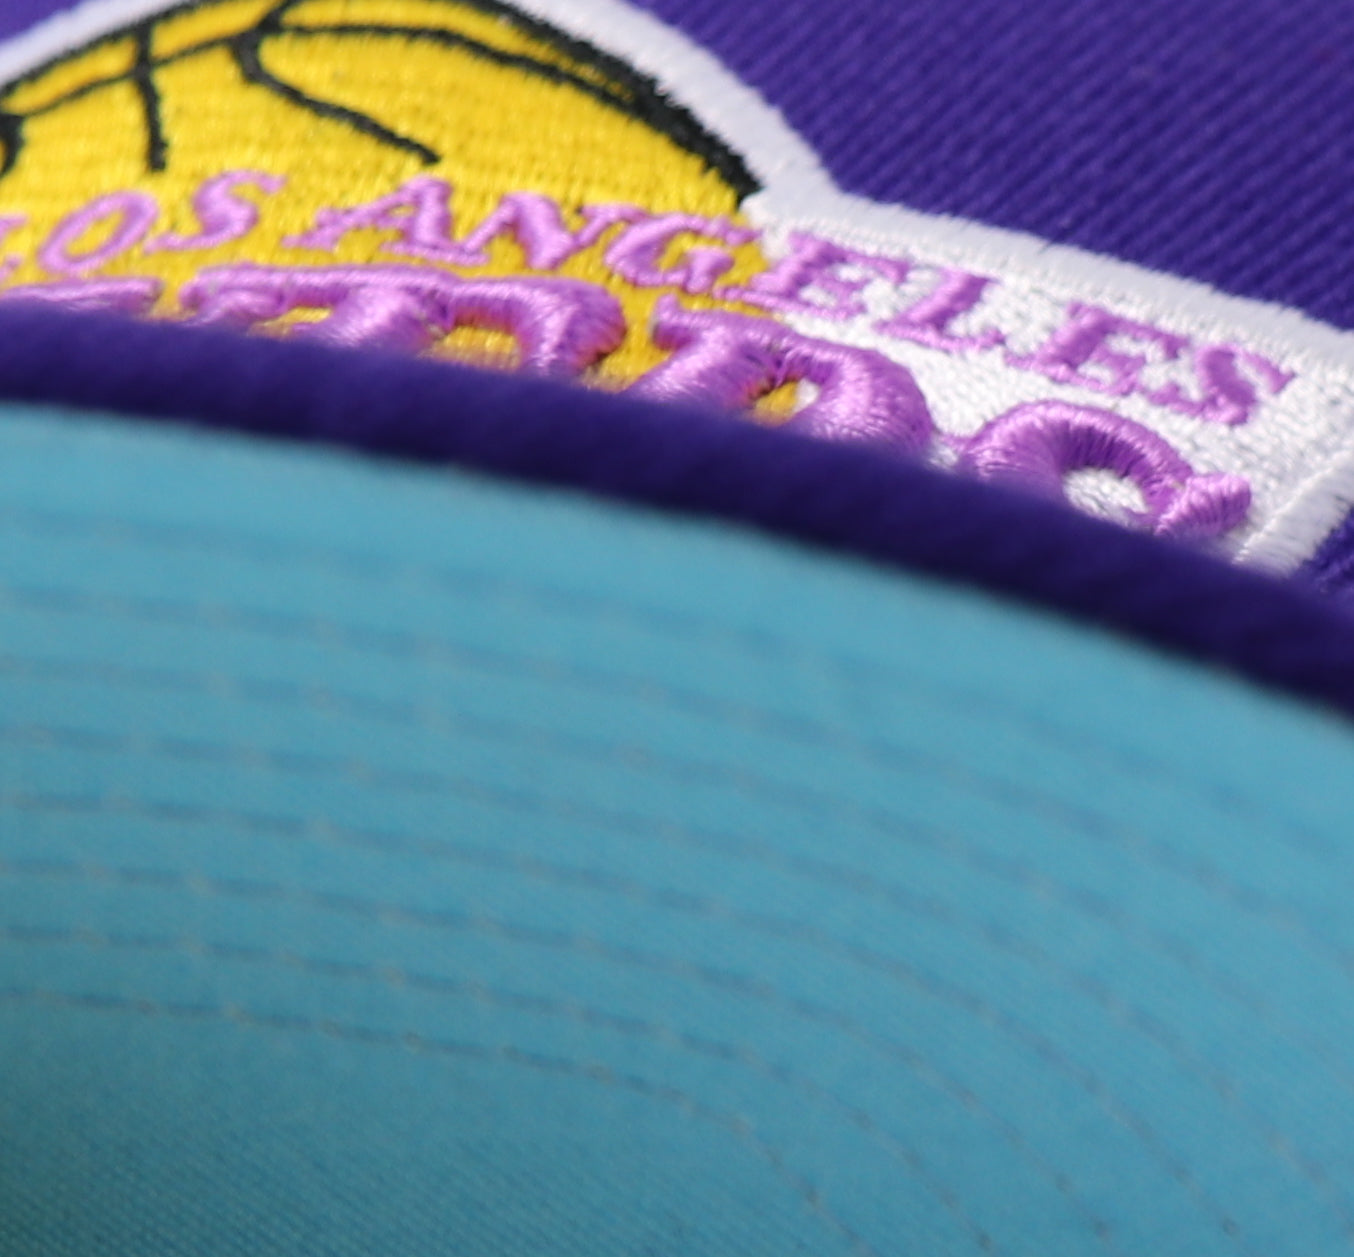 LOS ANGELES LAKERS (PURPLE) "FINALS PATCH" MITCHELL & NESS (SKY BLUE BOTTOM)